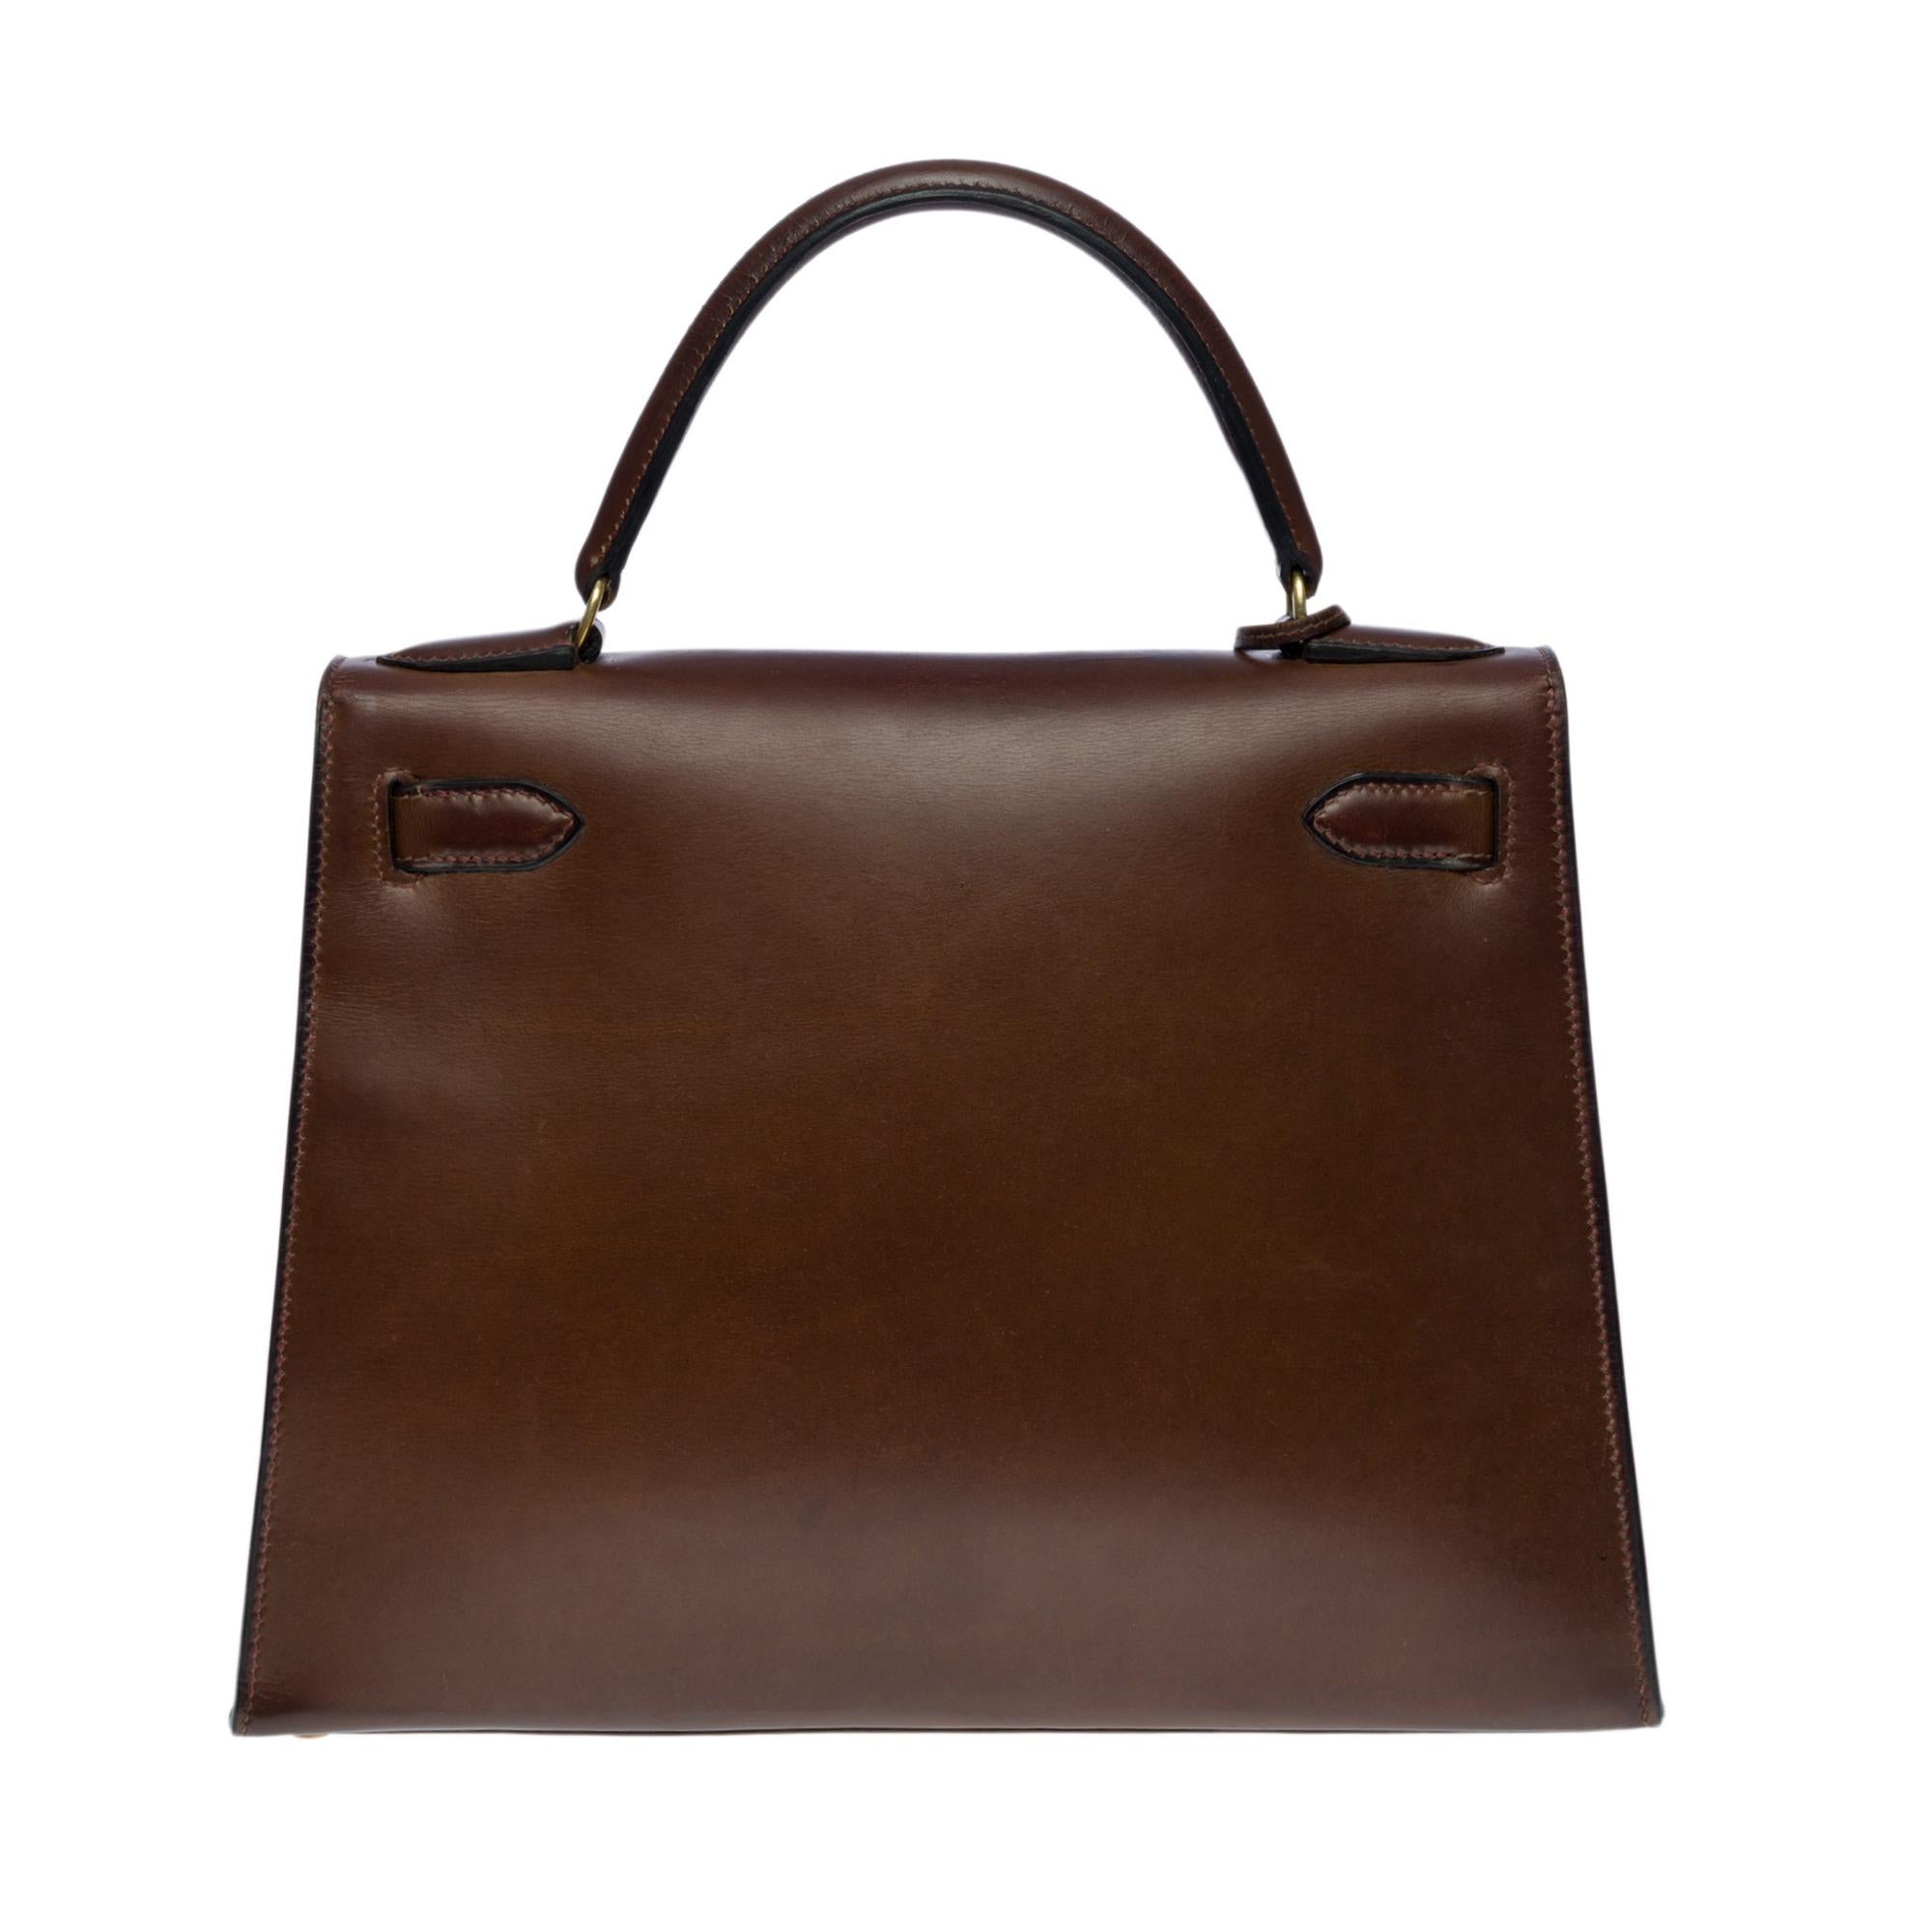 Splendid Hermès Kelly 28 sellier handbag in natural calf brown leather (very close to the Barenia leather), gold plated metal hardware, simple handle in brown leather allowing a hand carry
Flap closure
Inner lining in brown leather, a zippered